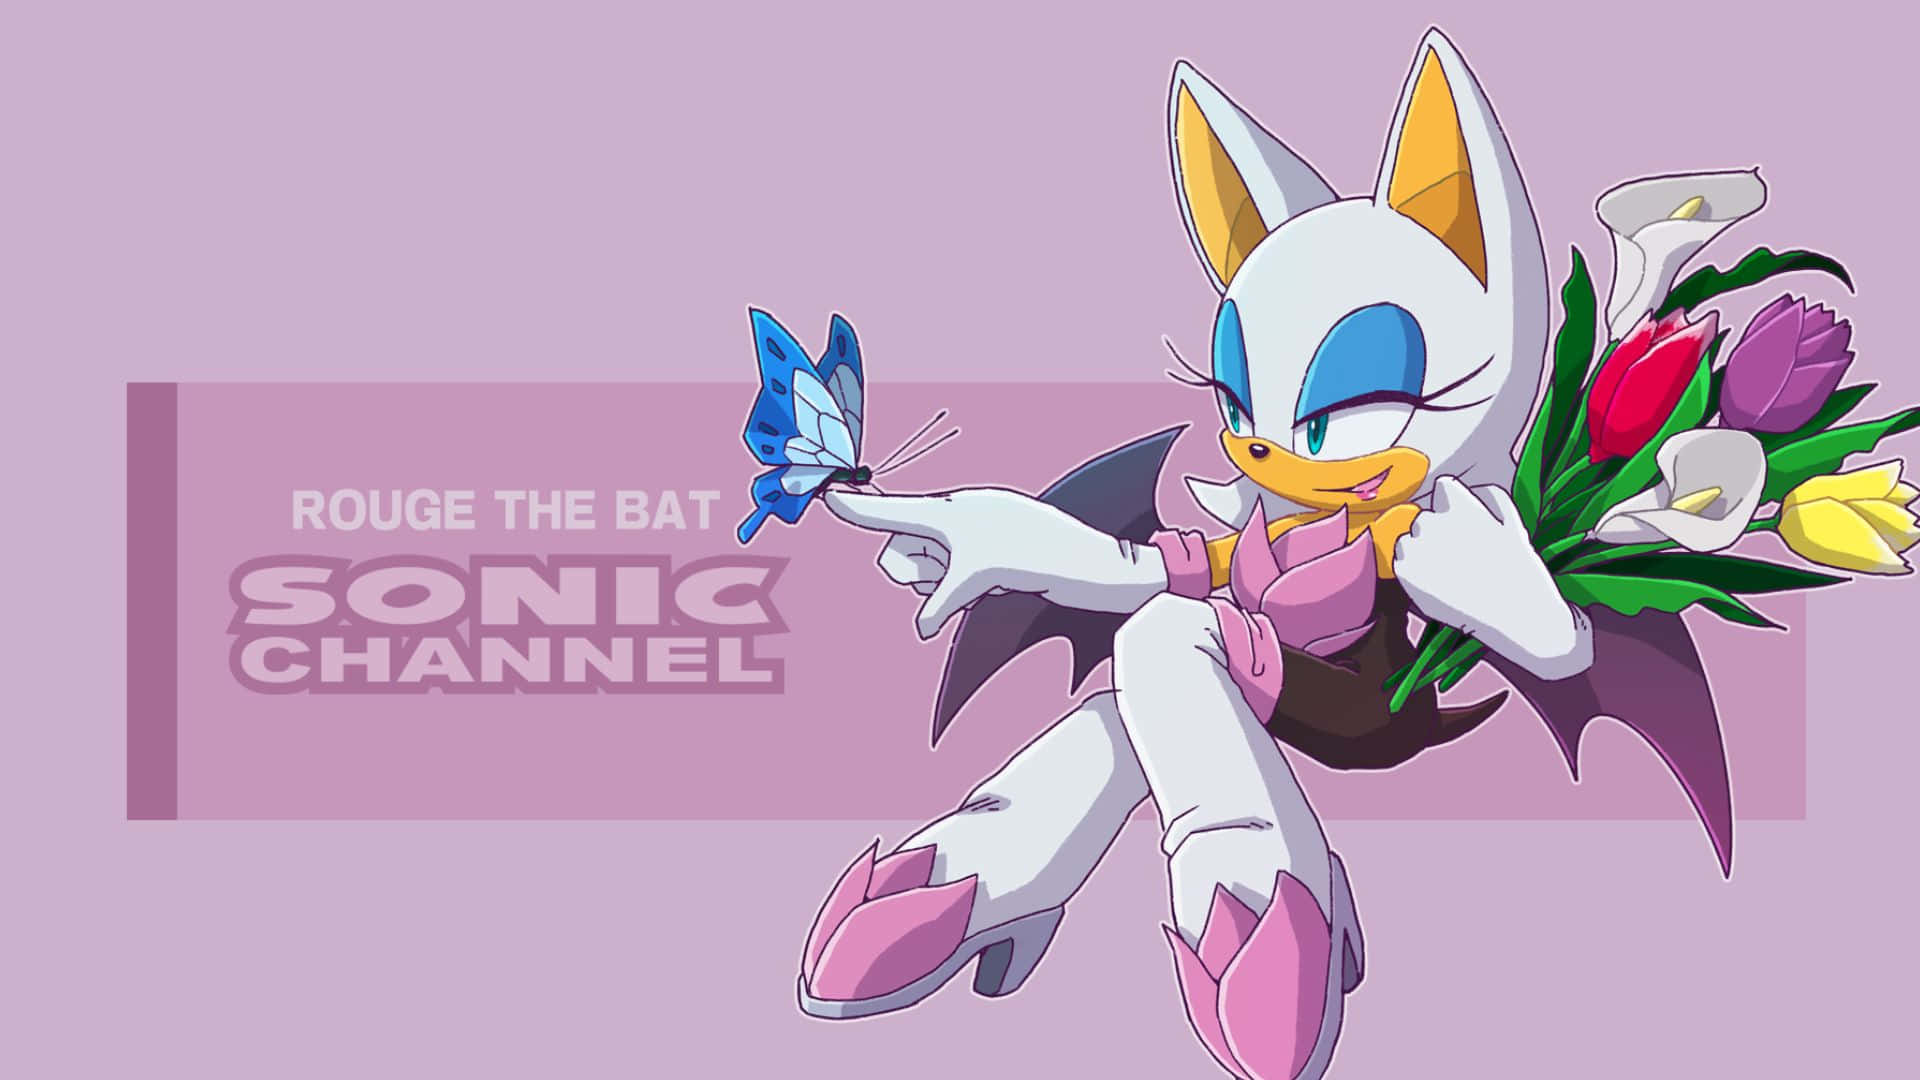 Rouge The Bat Flying High in the Sky Wallpaper